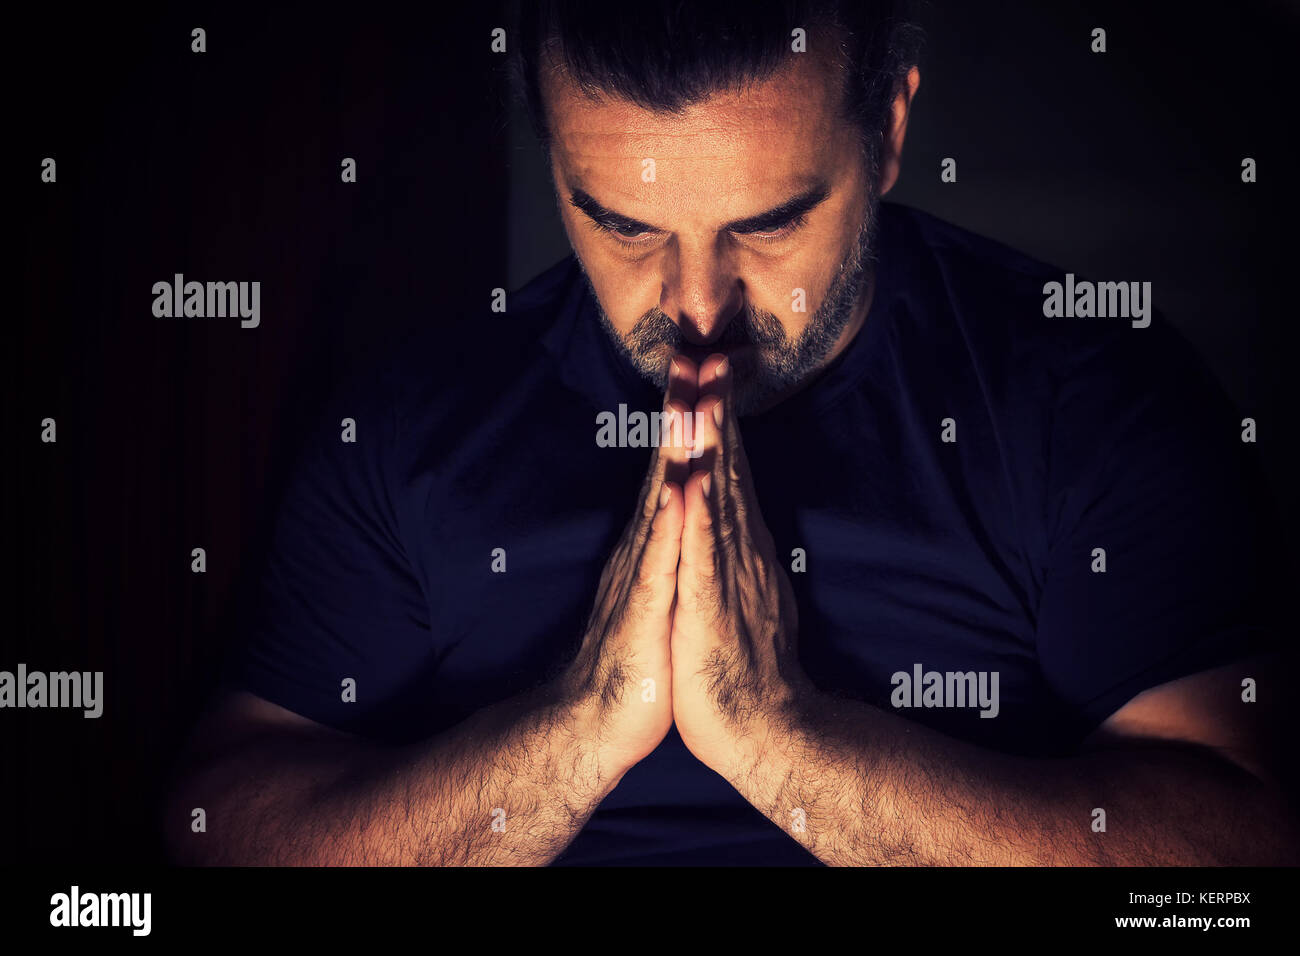 Dark haired man bowing his head in prayer Stock Photo